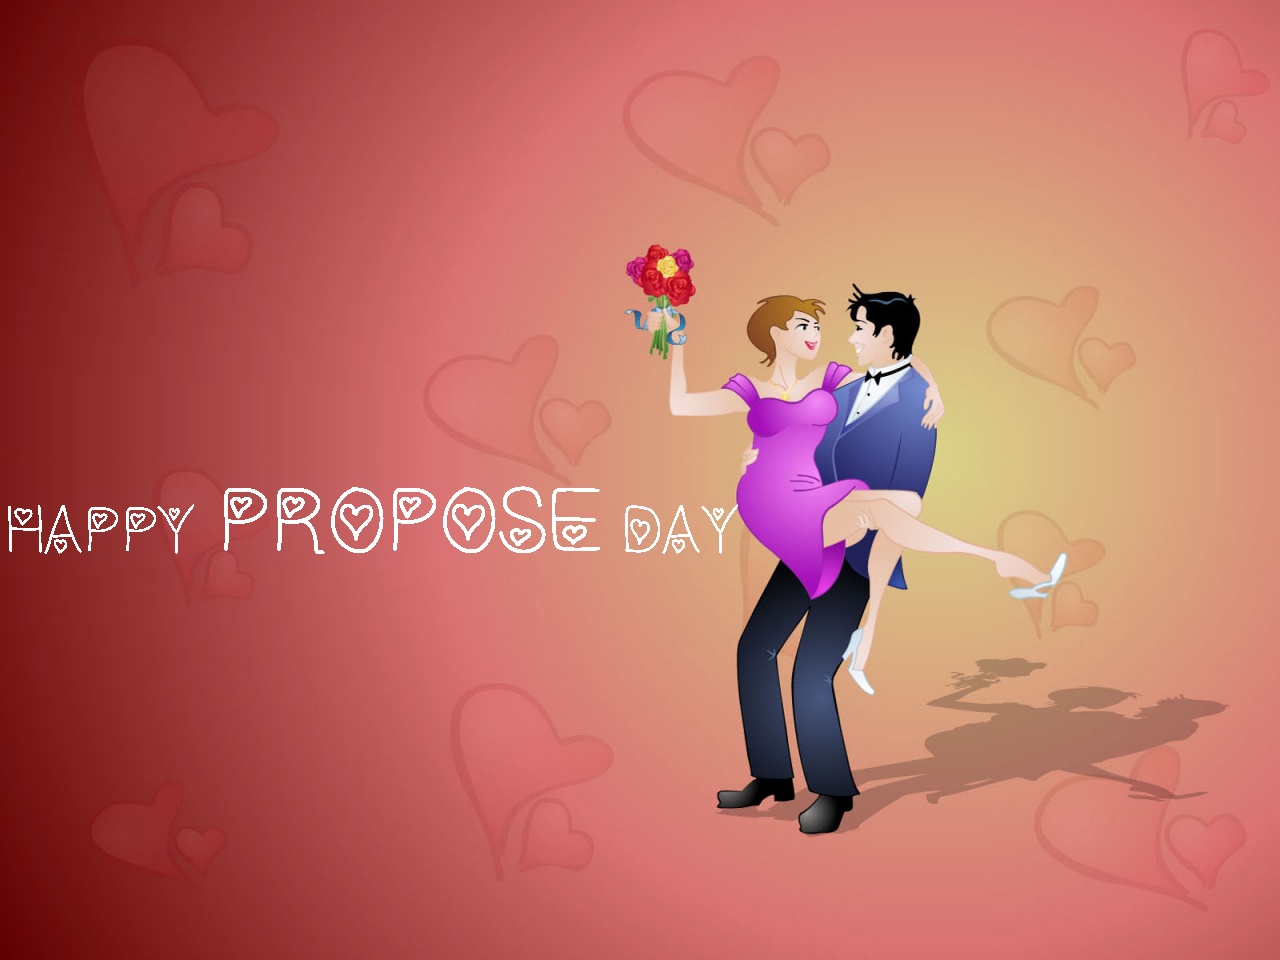 Happy Propose Day SMS